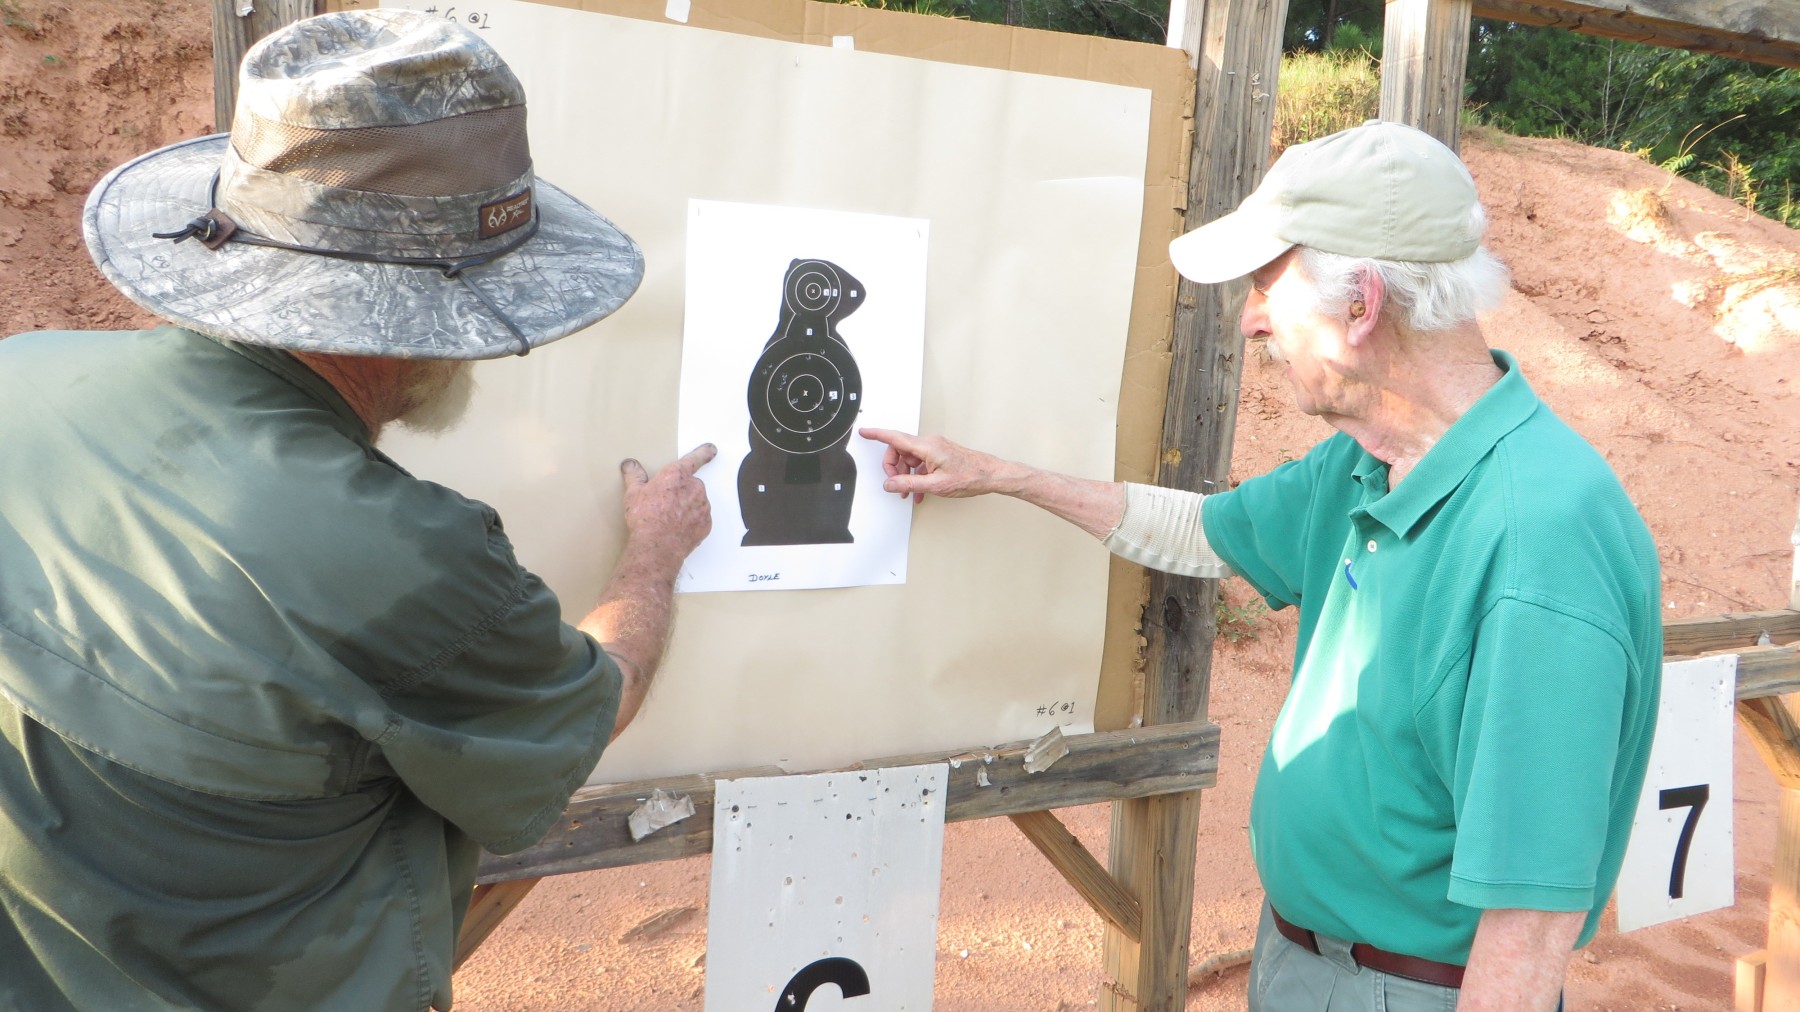 Bill and Doyle admire Doyle's 100 yard target.  Definitely some impressive handgun shooting there!